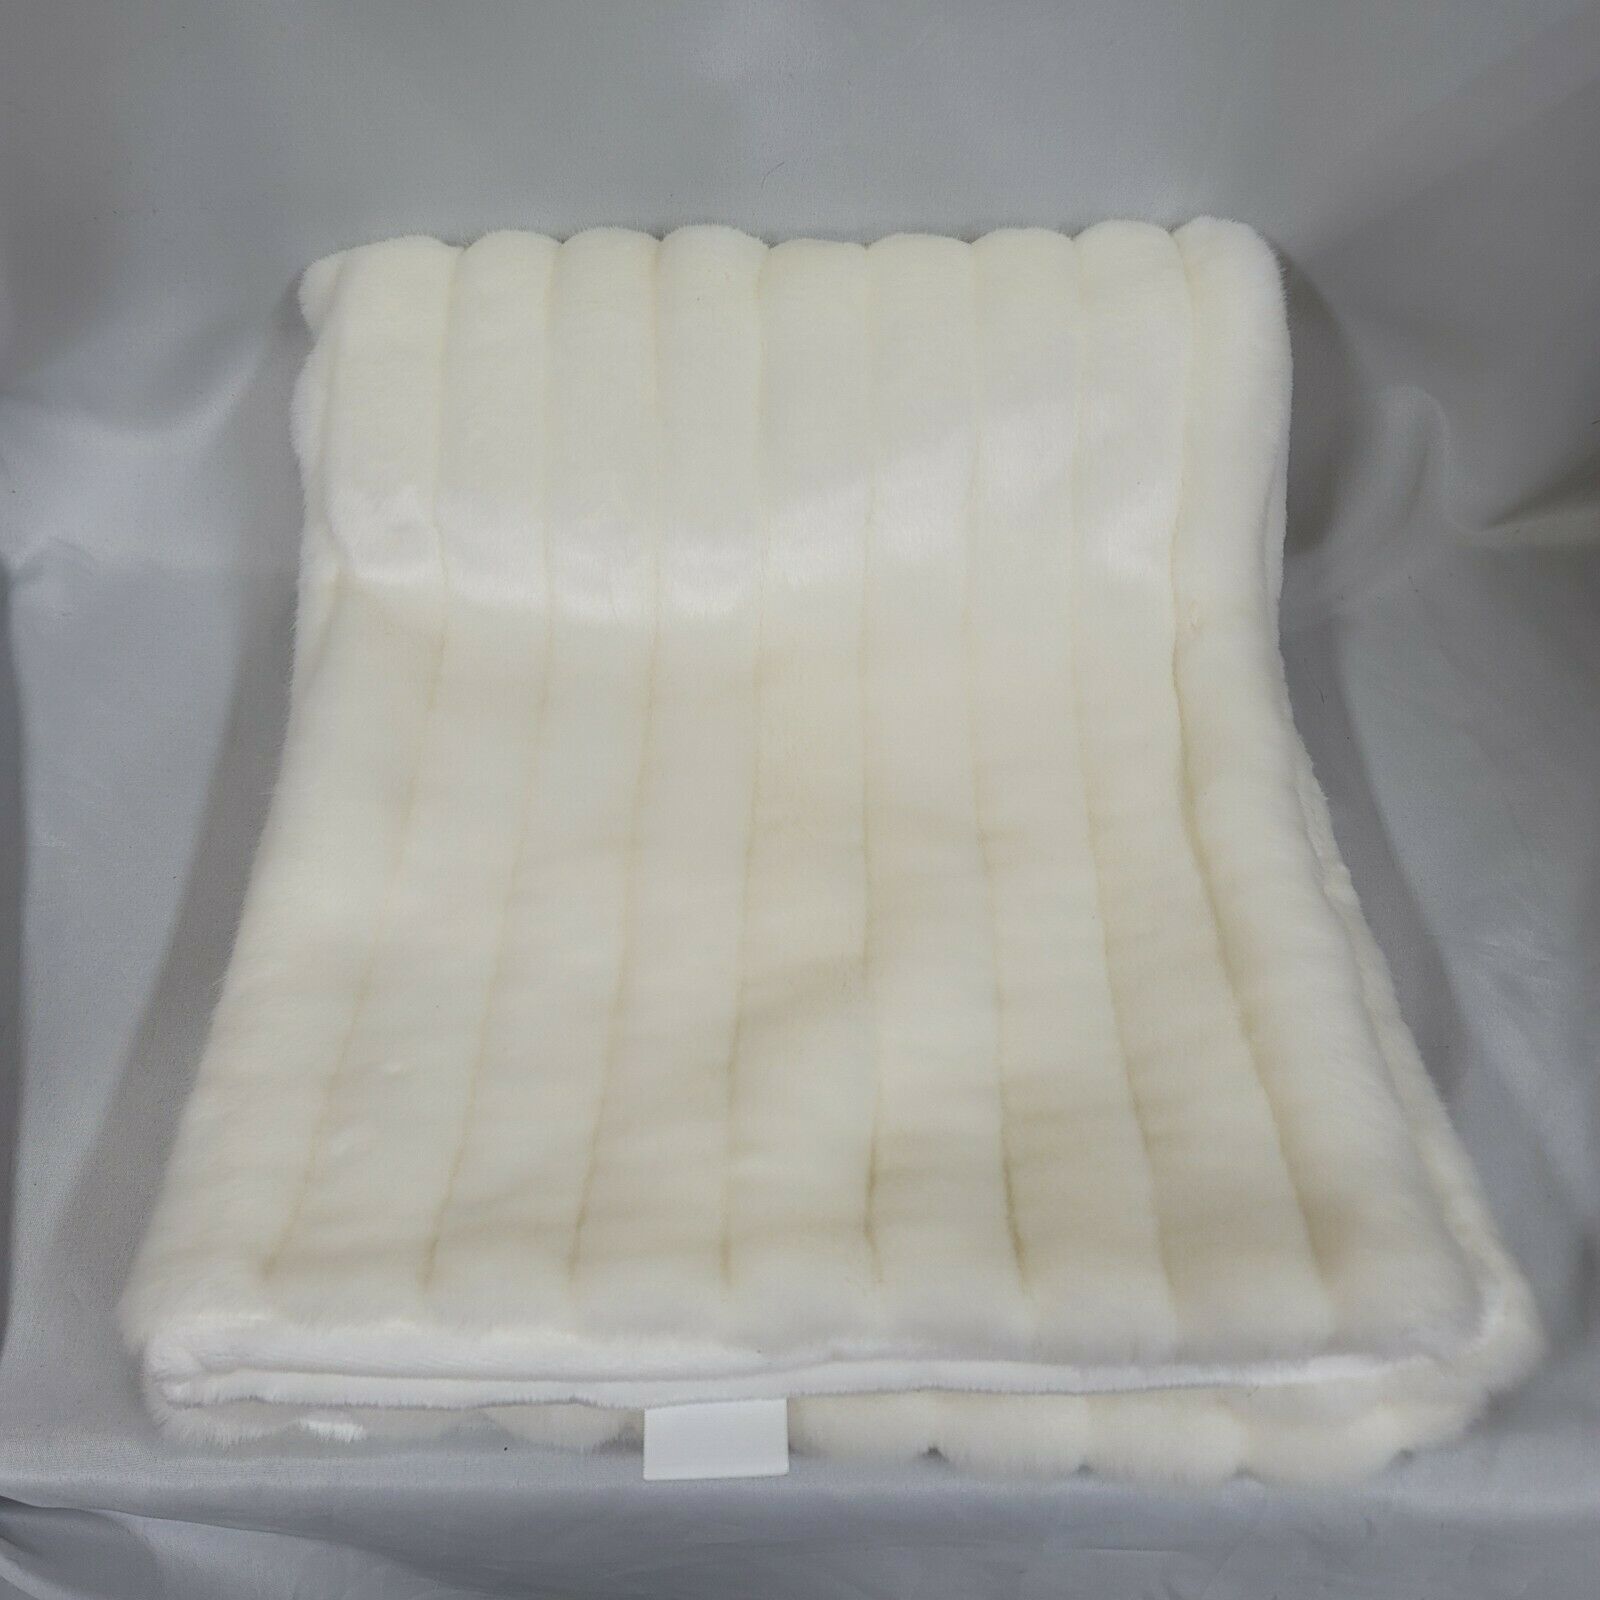 First Impressions Faux Fur Furry White Ribbed Luxury Baby Blanket 30x40" NWOT - $48.50